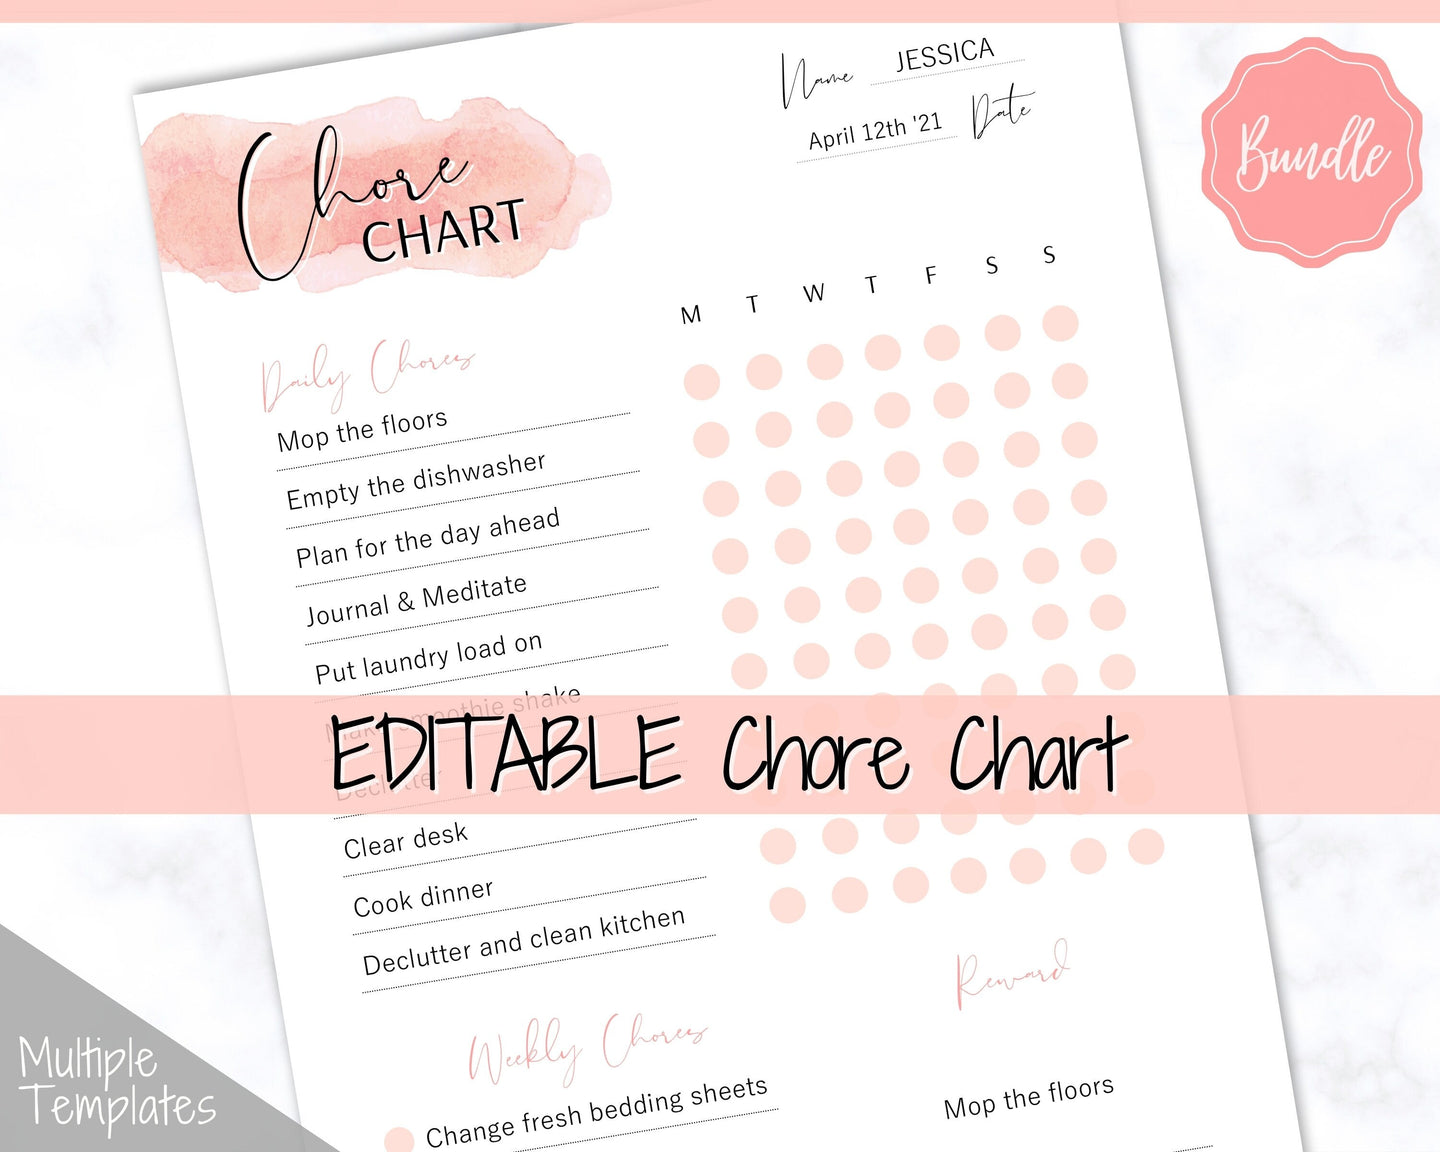 Reward Chart for Kids, Girls Chore Chart Template, Editable Chore Chart Printable, Daily & Weekly Chores, Responsibility, Behavior, Routine - Pink